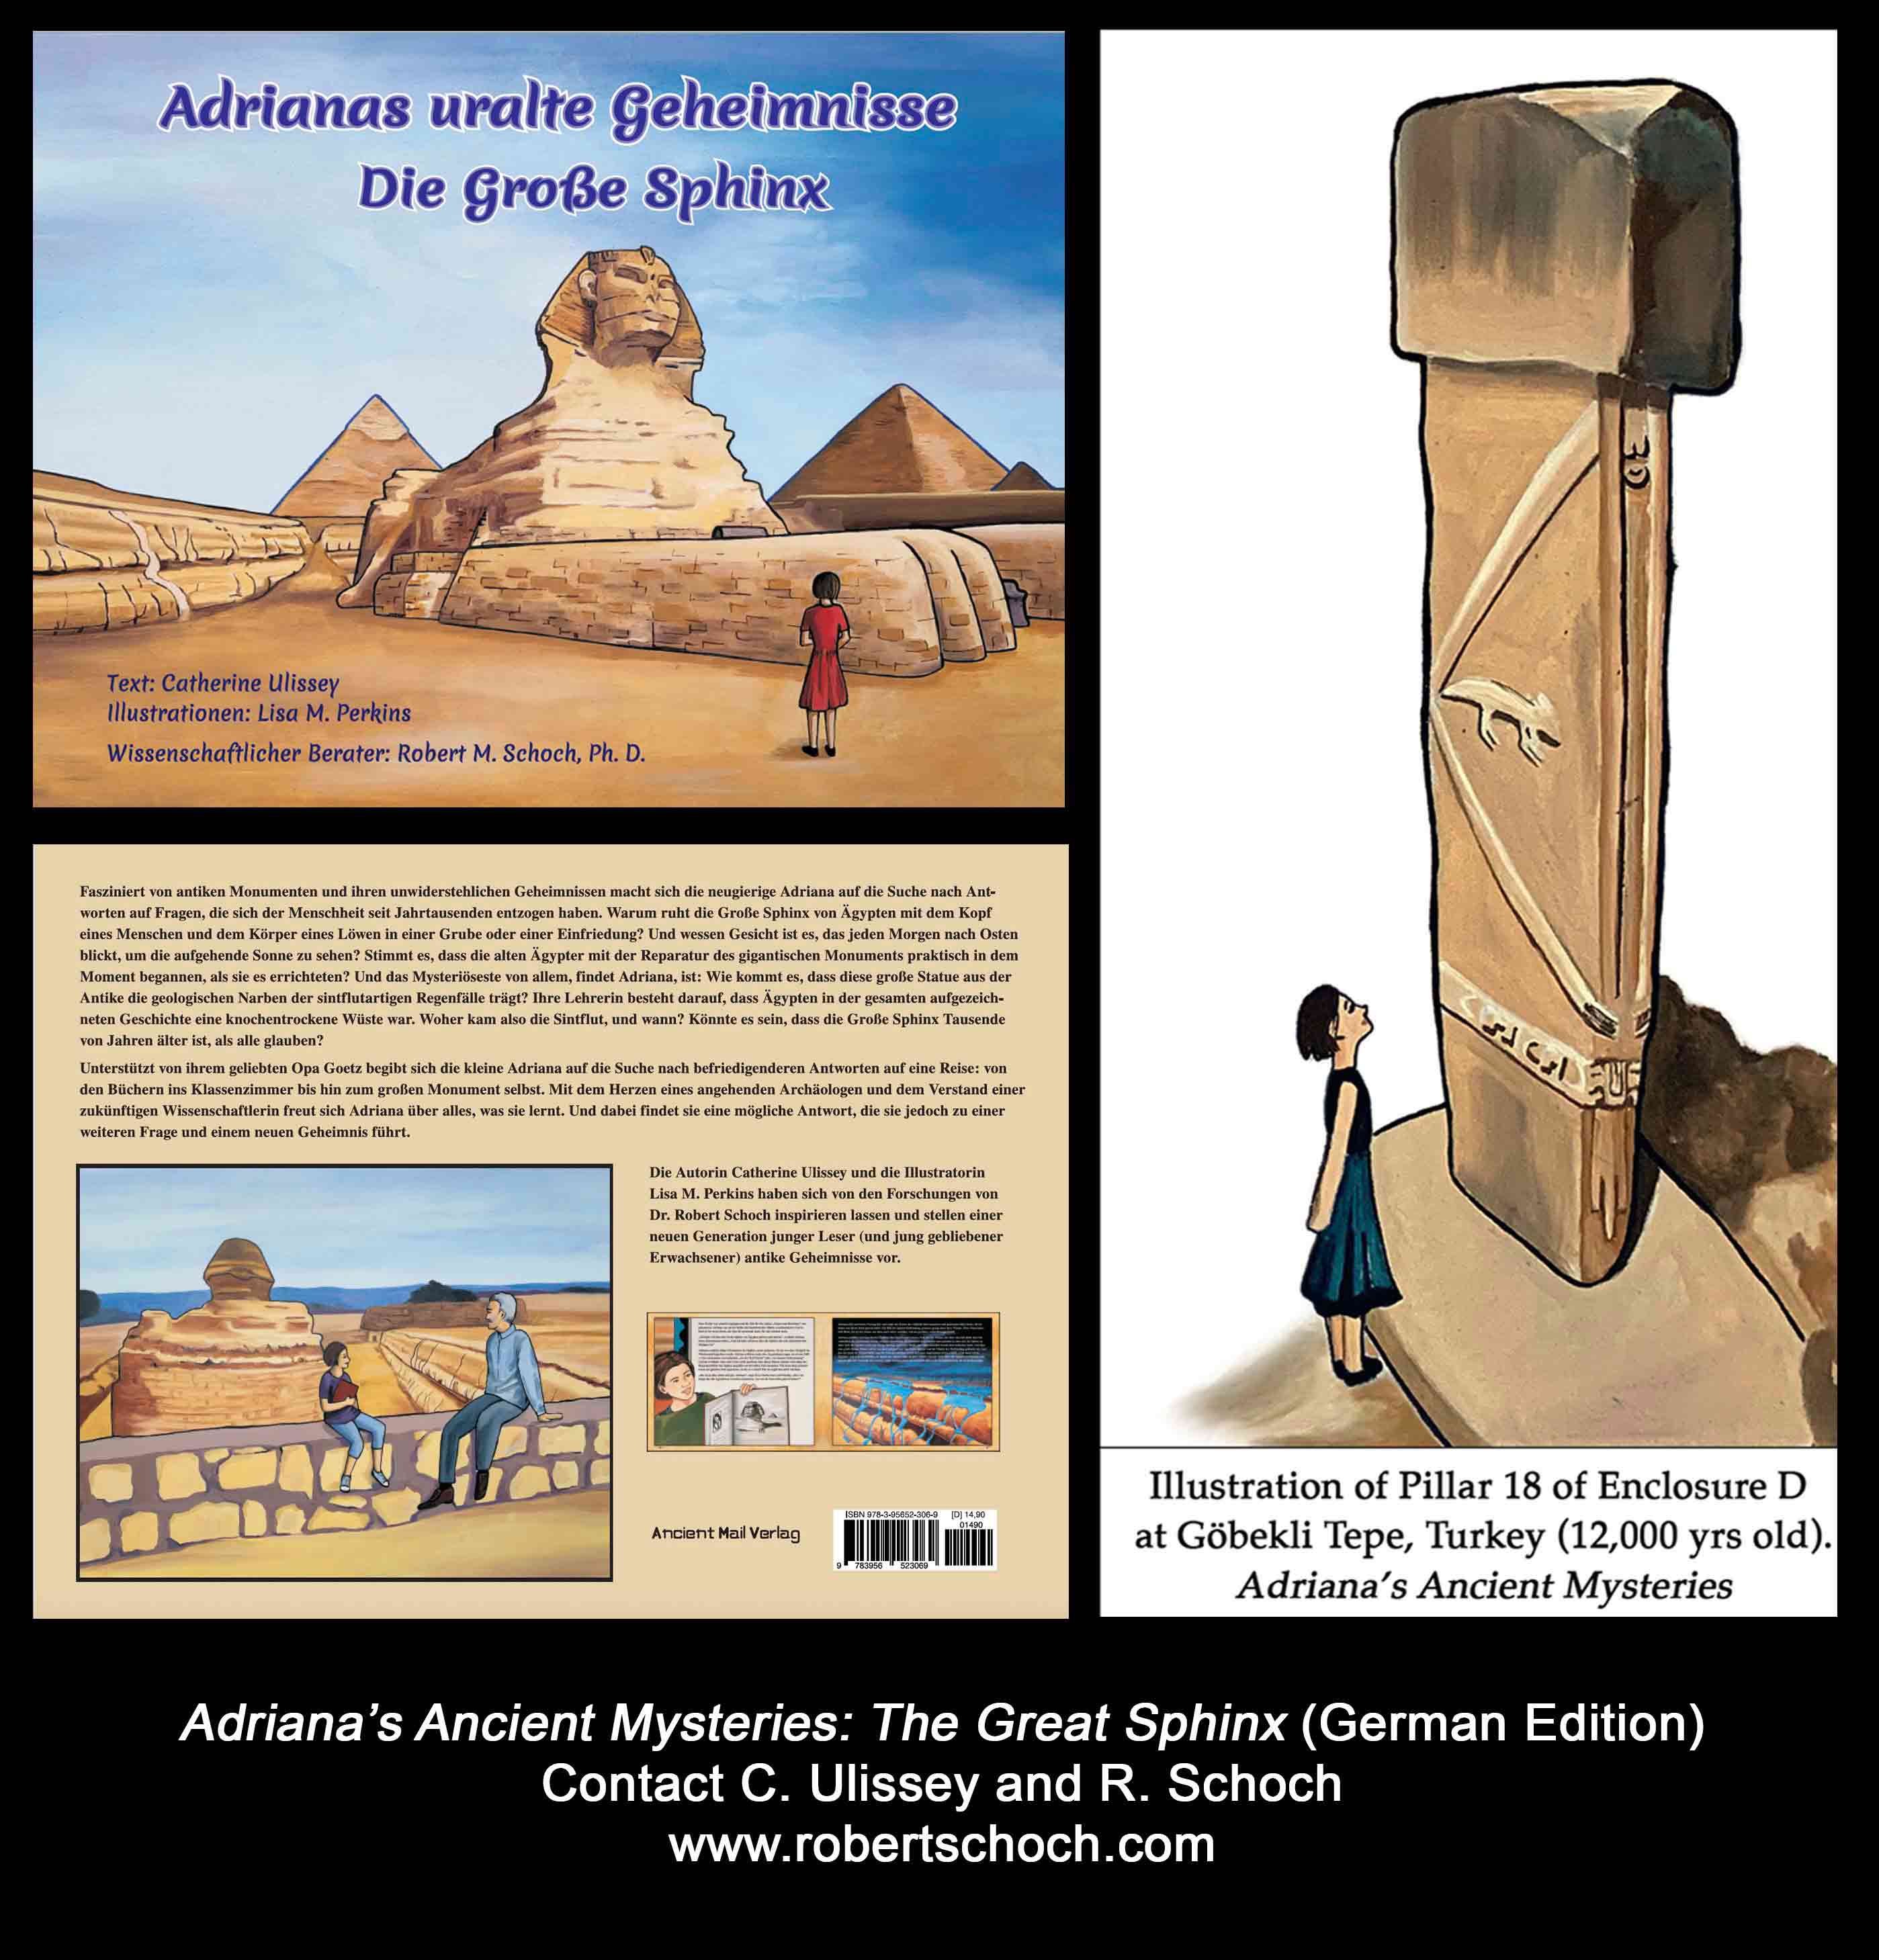 A montage of images from Adrianas Ancient Mysteries: The Great Sphinx